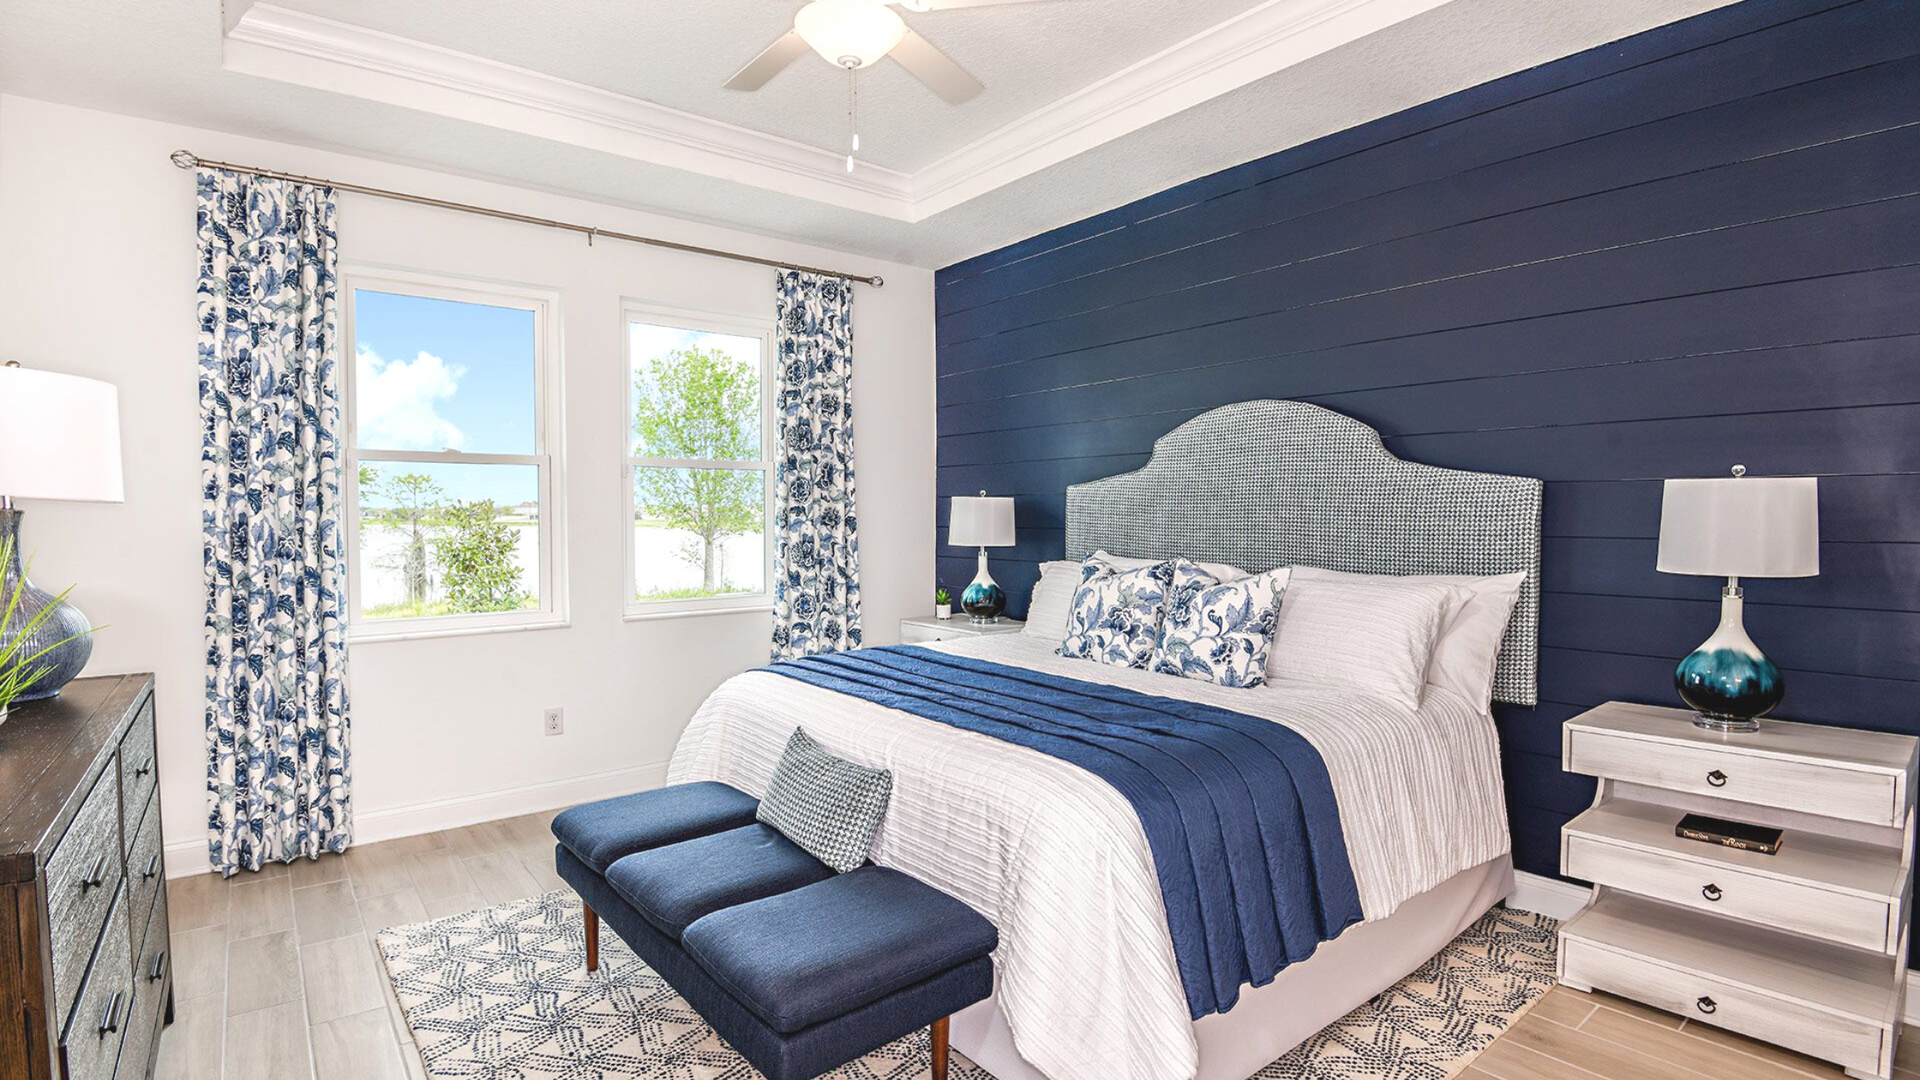 New Home Construction Bedroom William Ryan Homes Southwest Florida